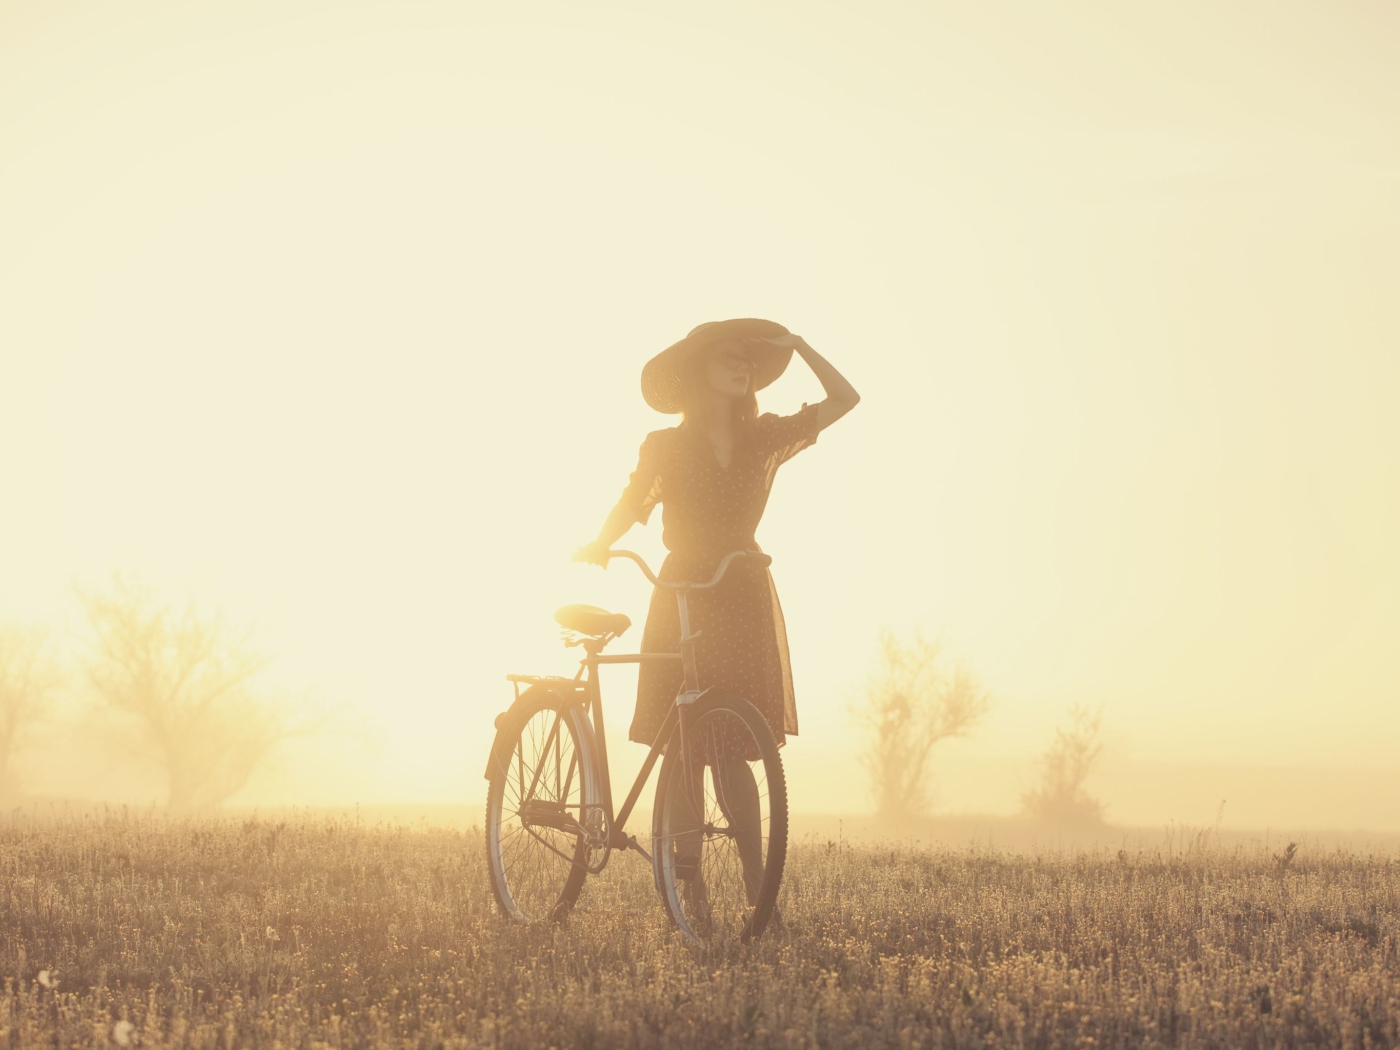 Das Girl And Bicycle On Misty Day Wallpaper 1400x1050